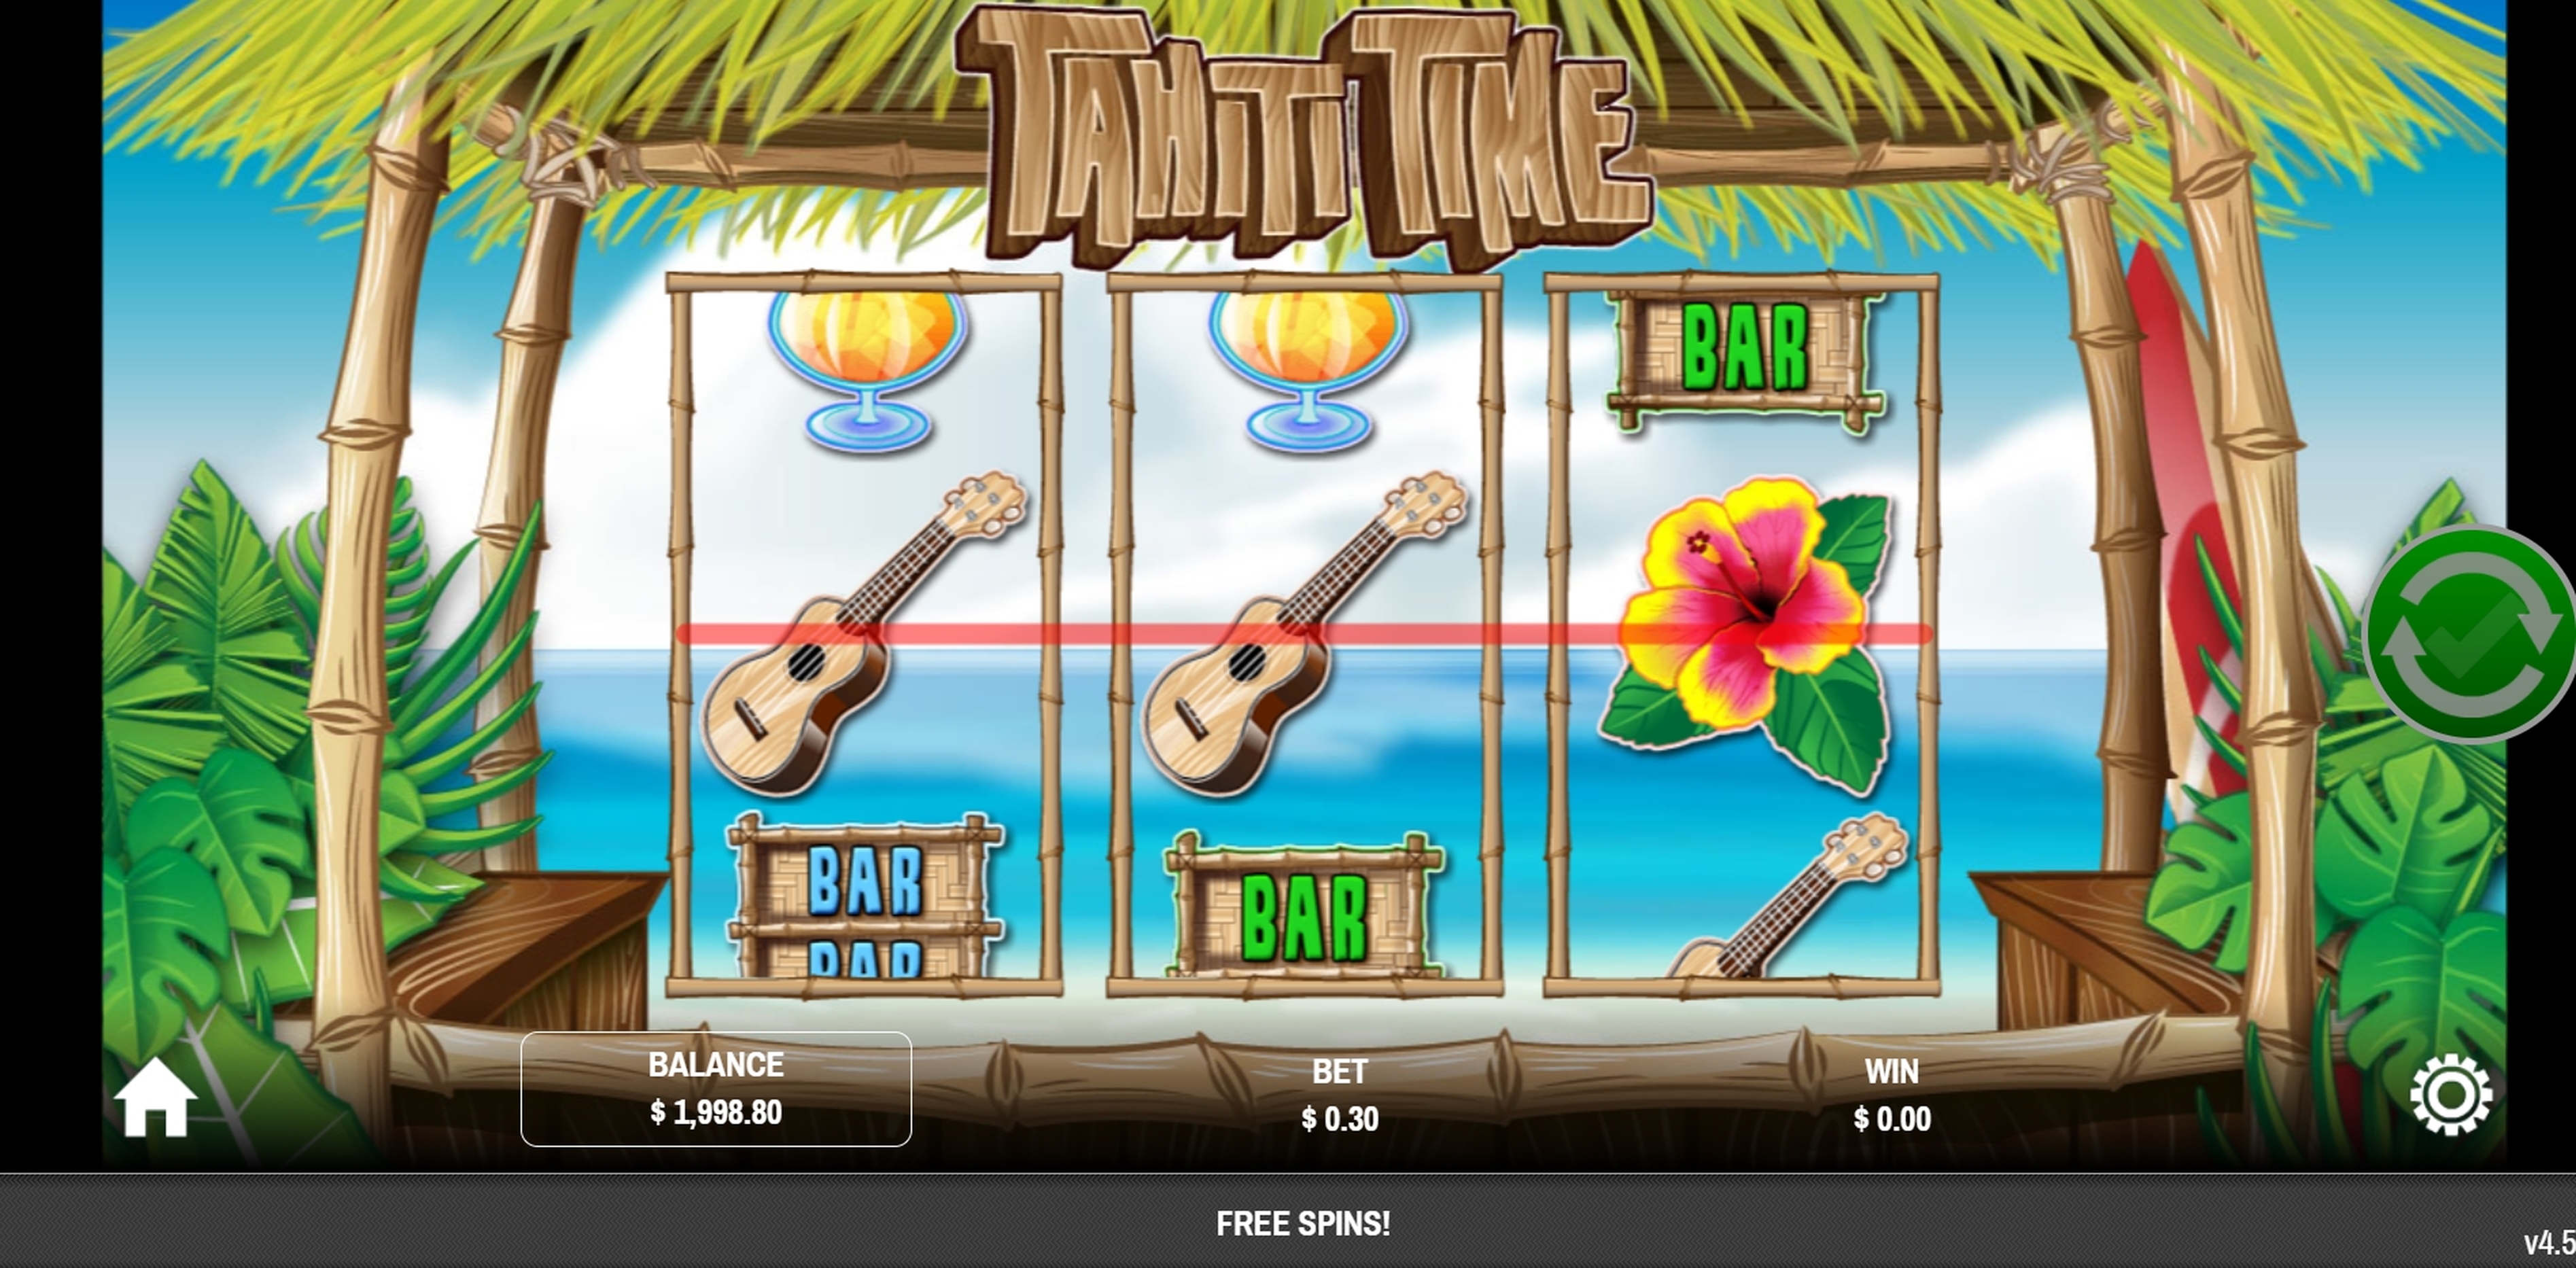 Win Money in Tahiti Time Free Slot Game by Rival